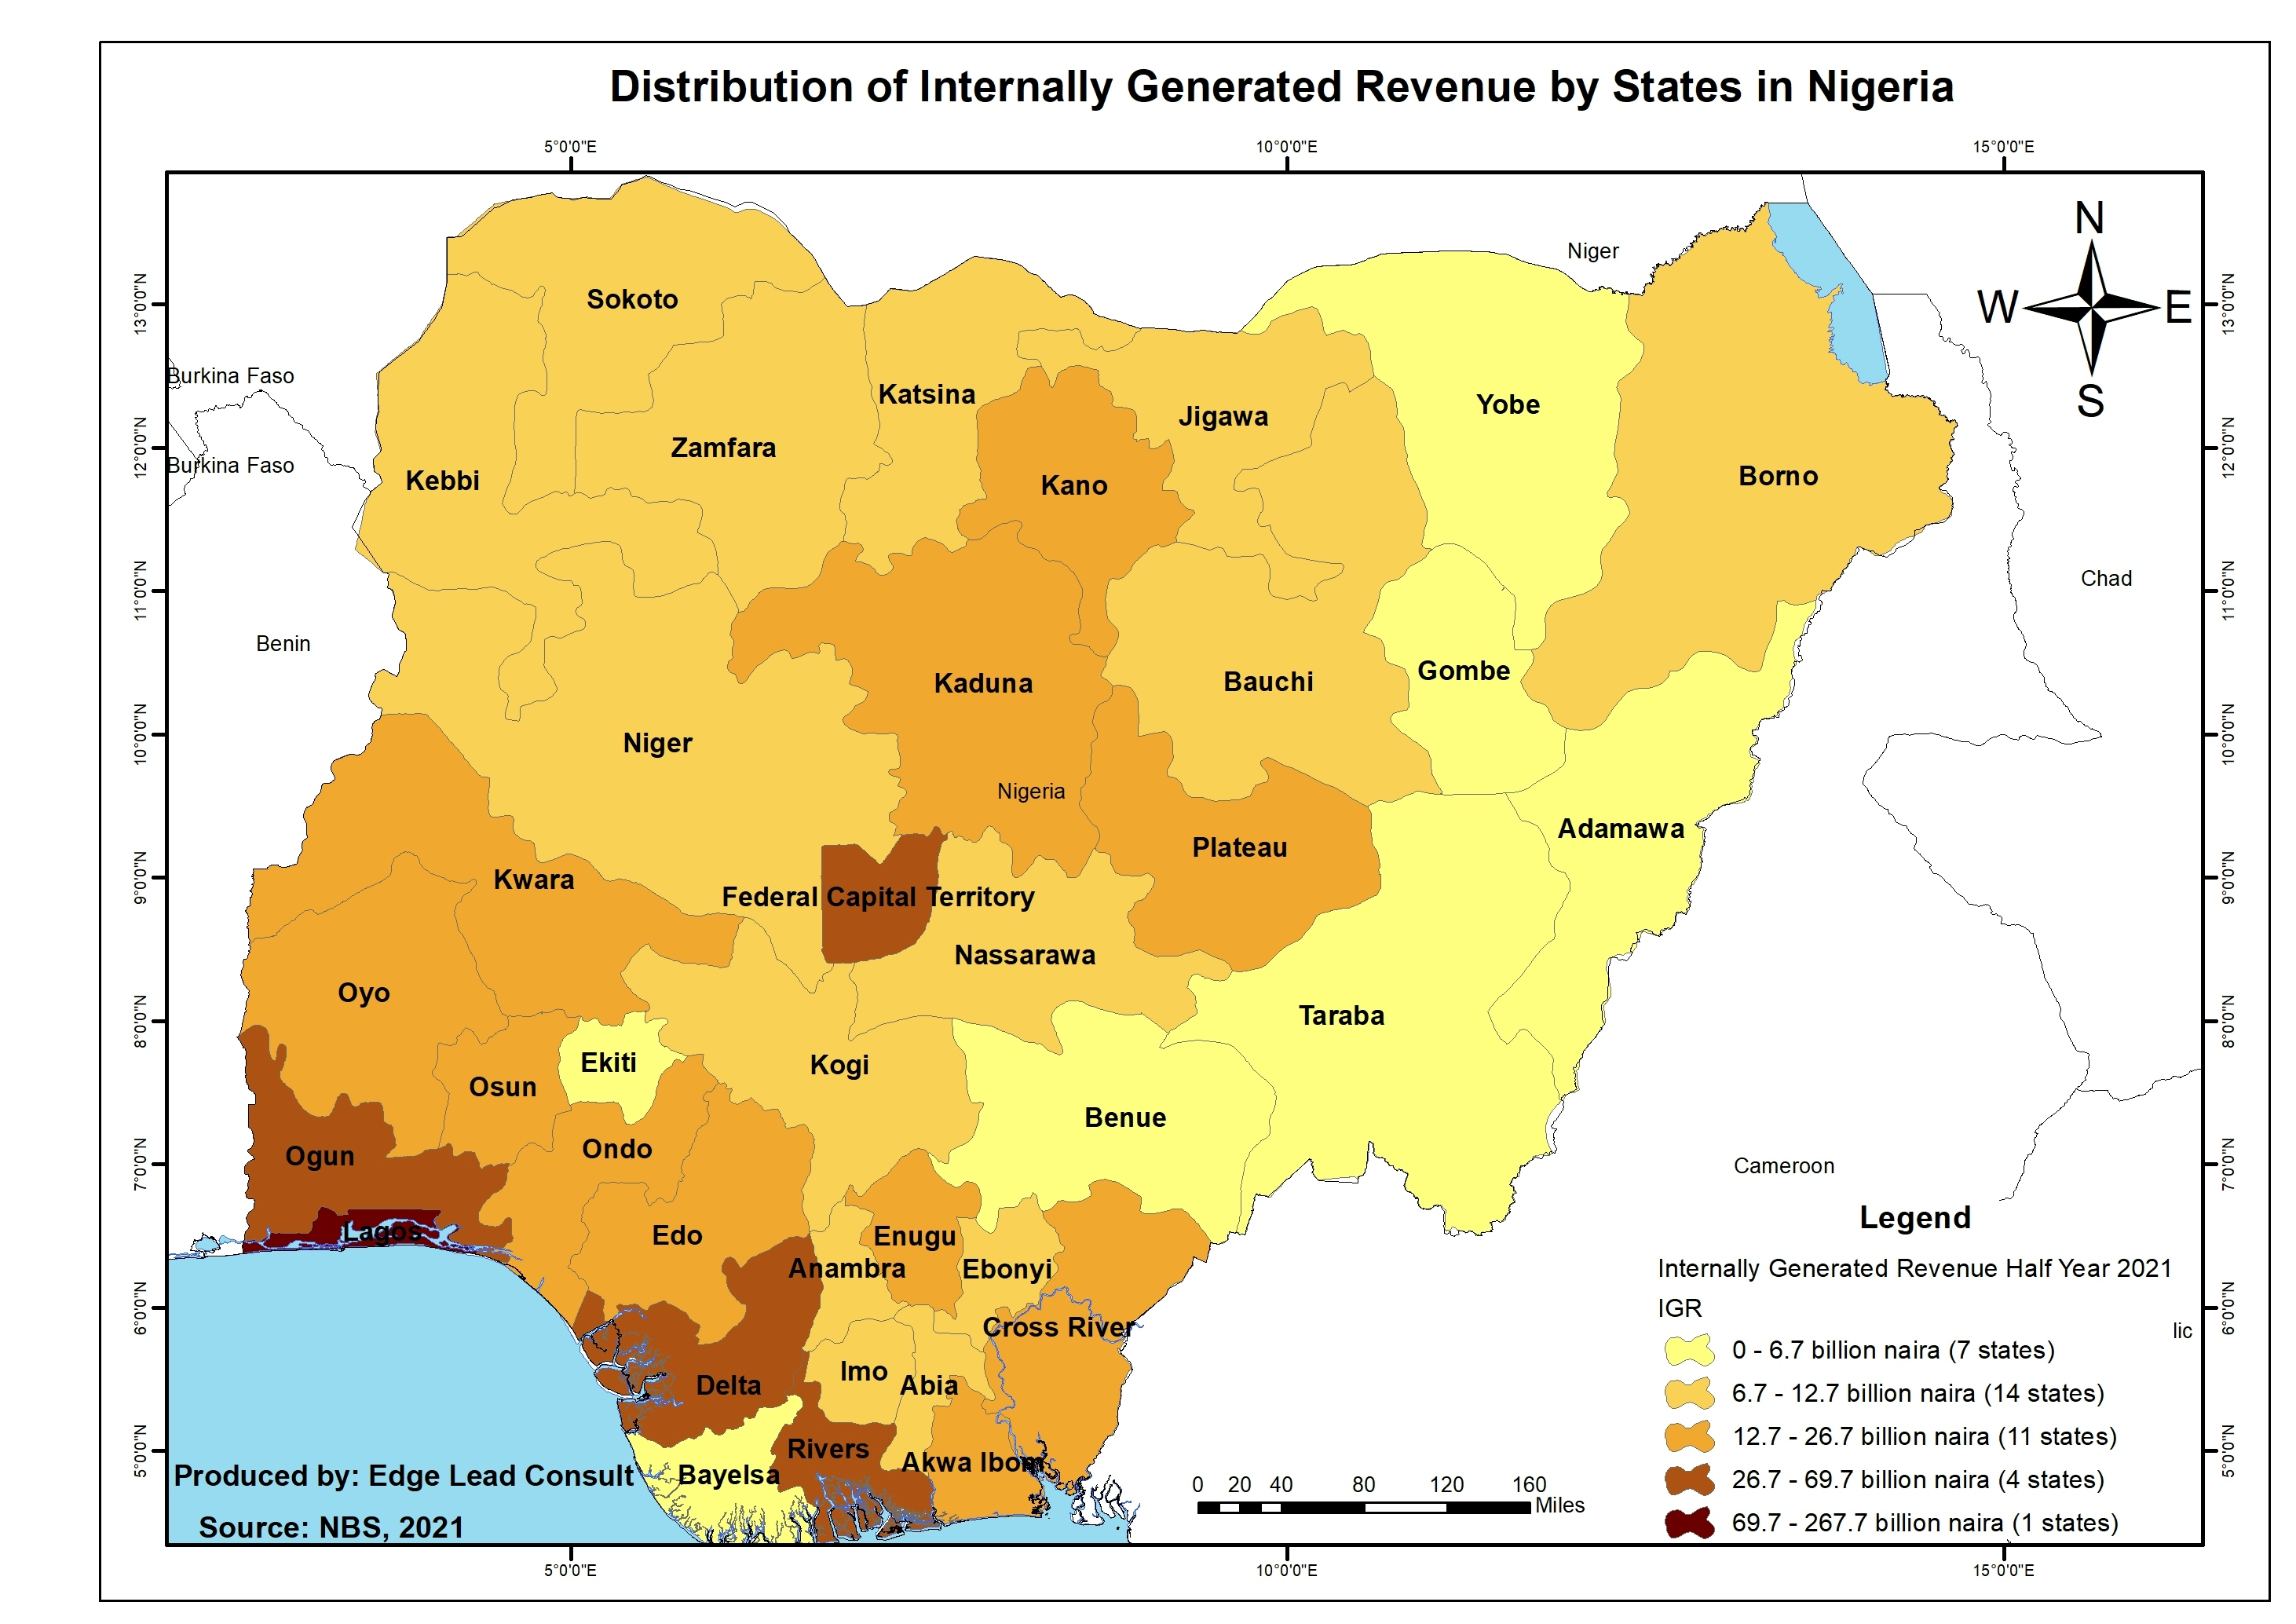 Internally Generated Revenue by States